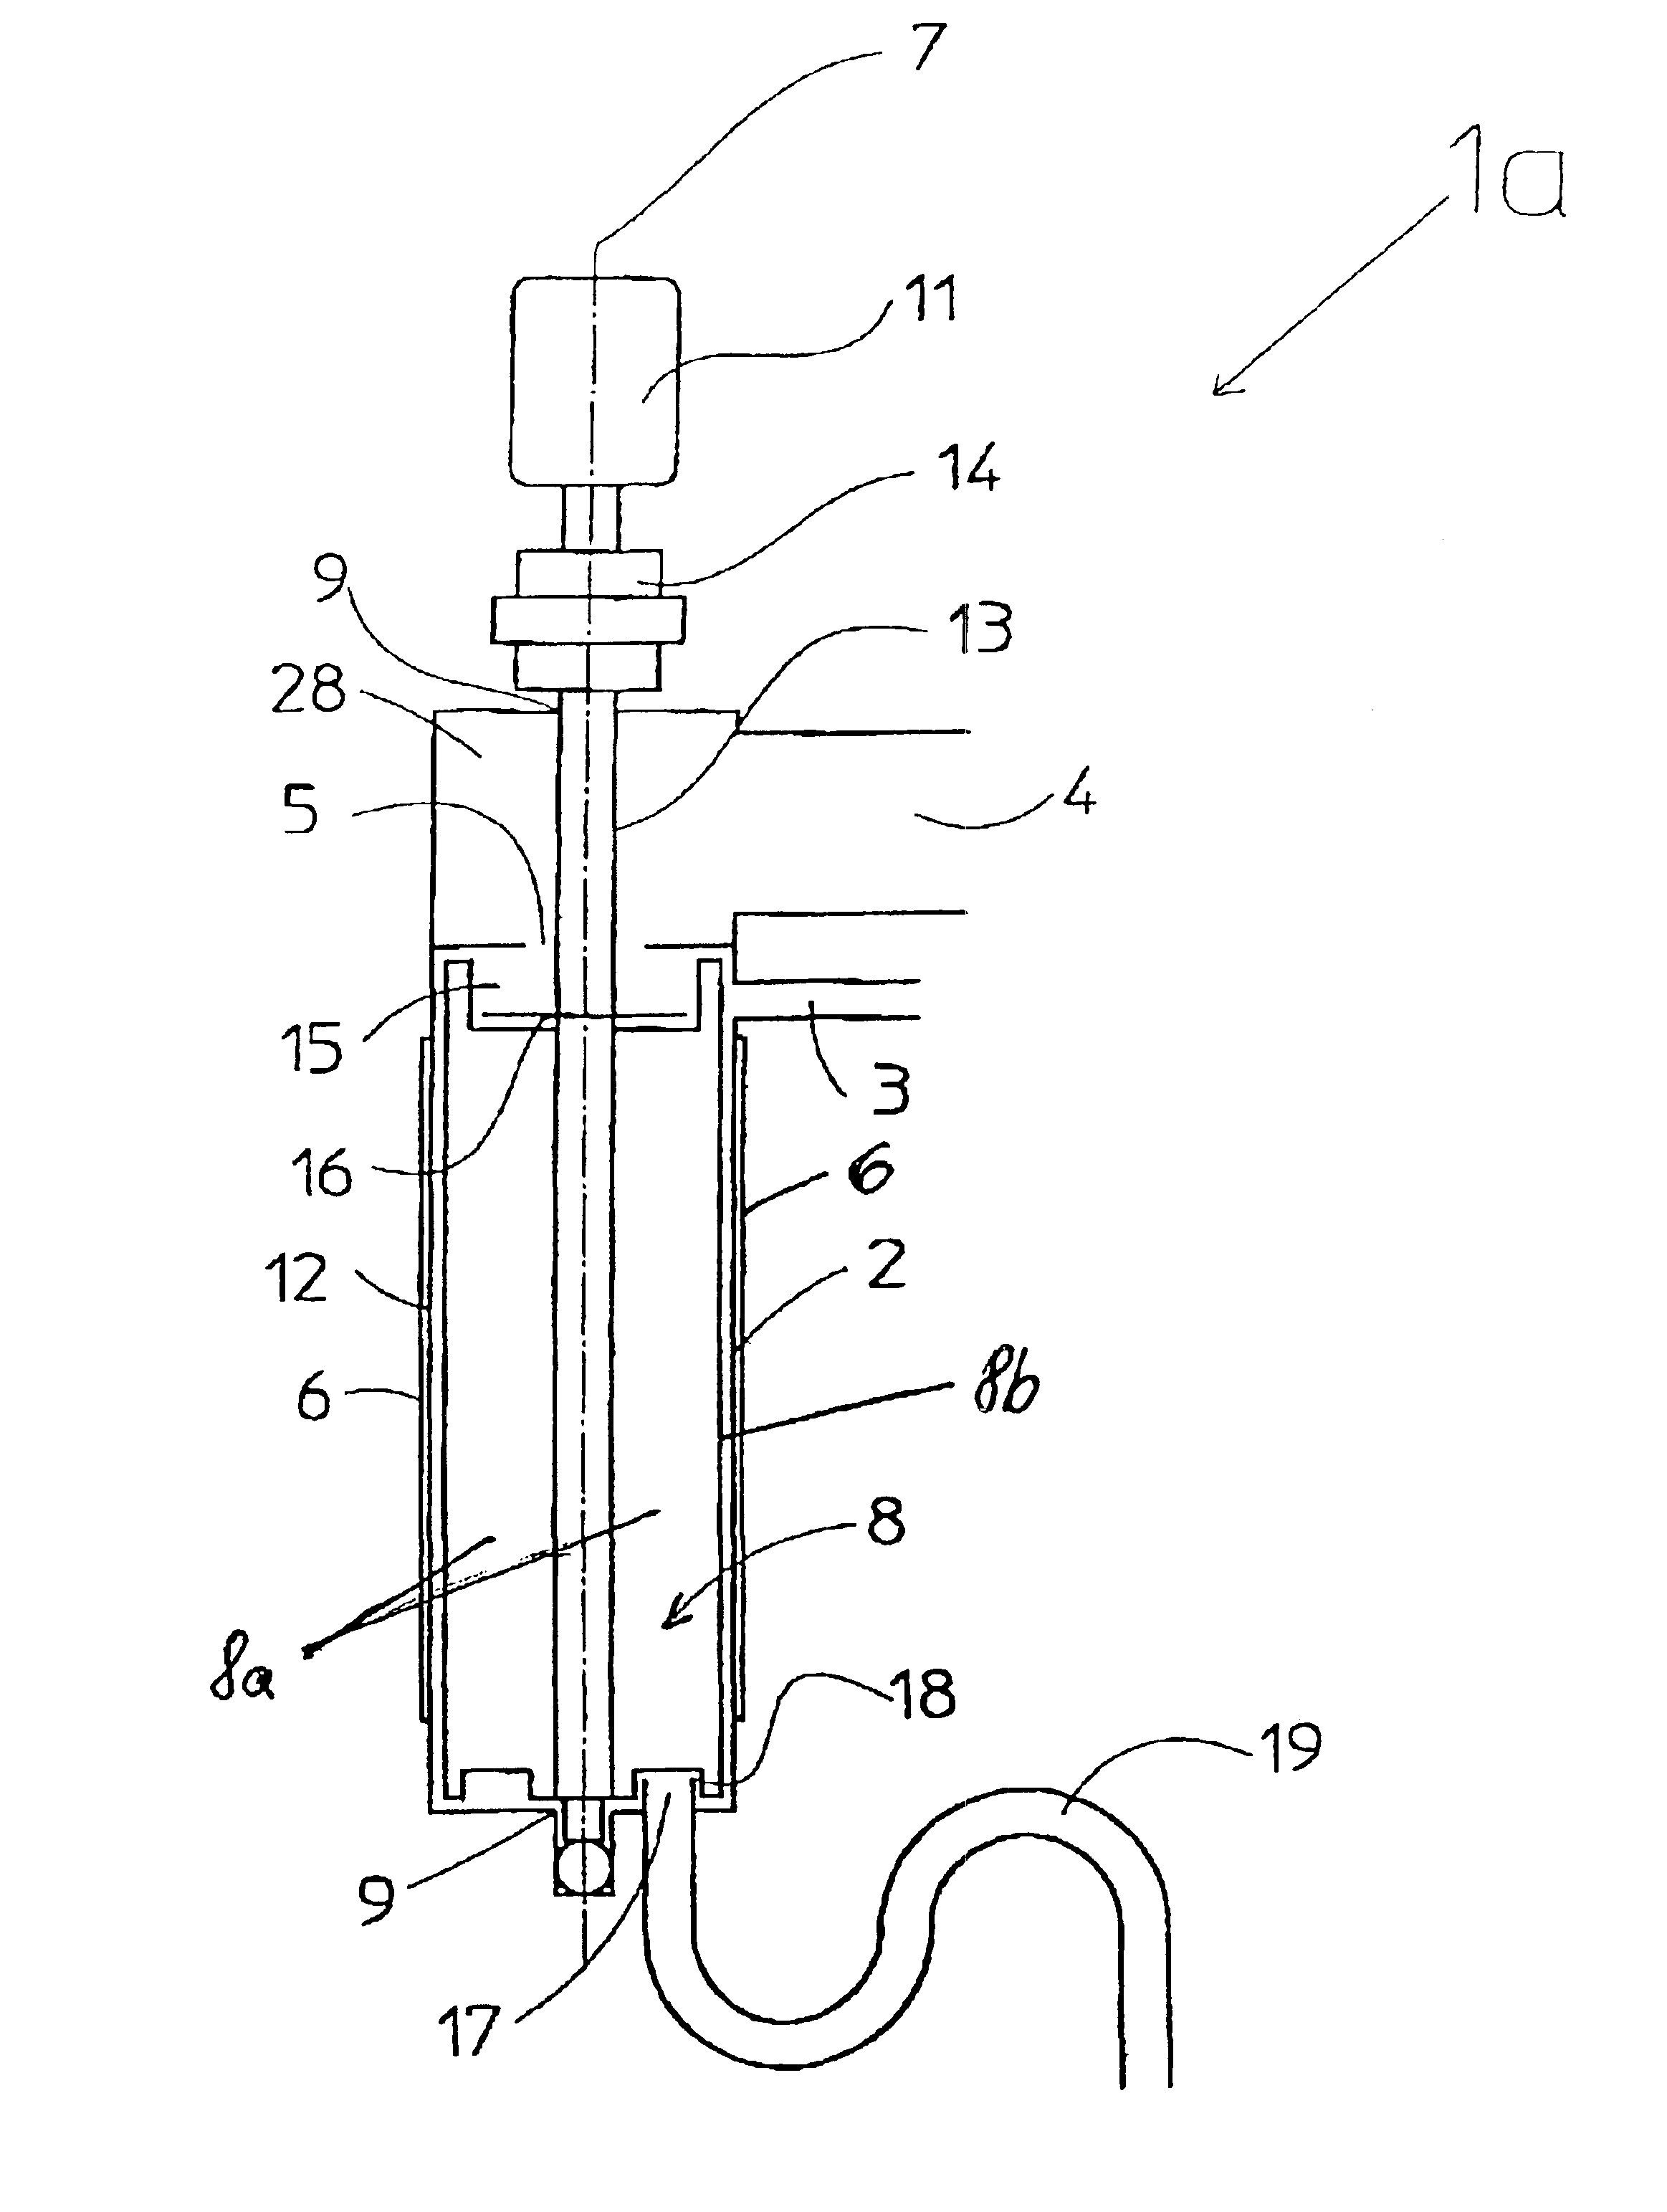 Method and apparatus for generating steam for a cooking device